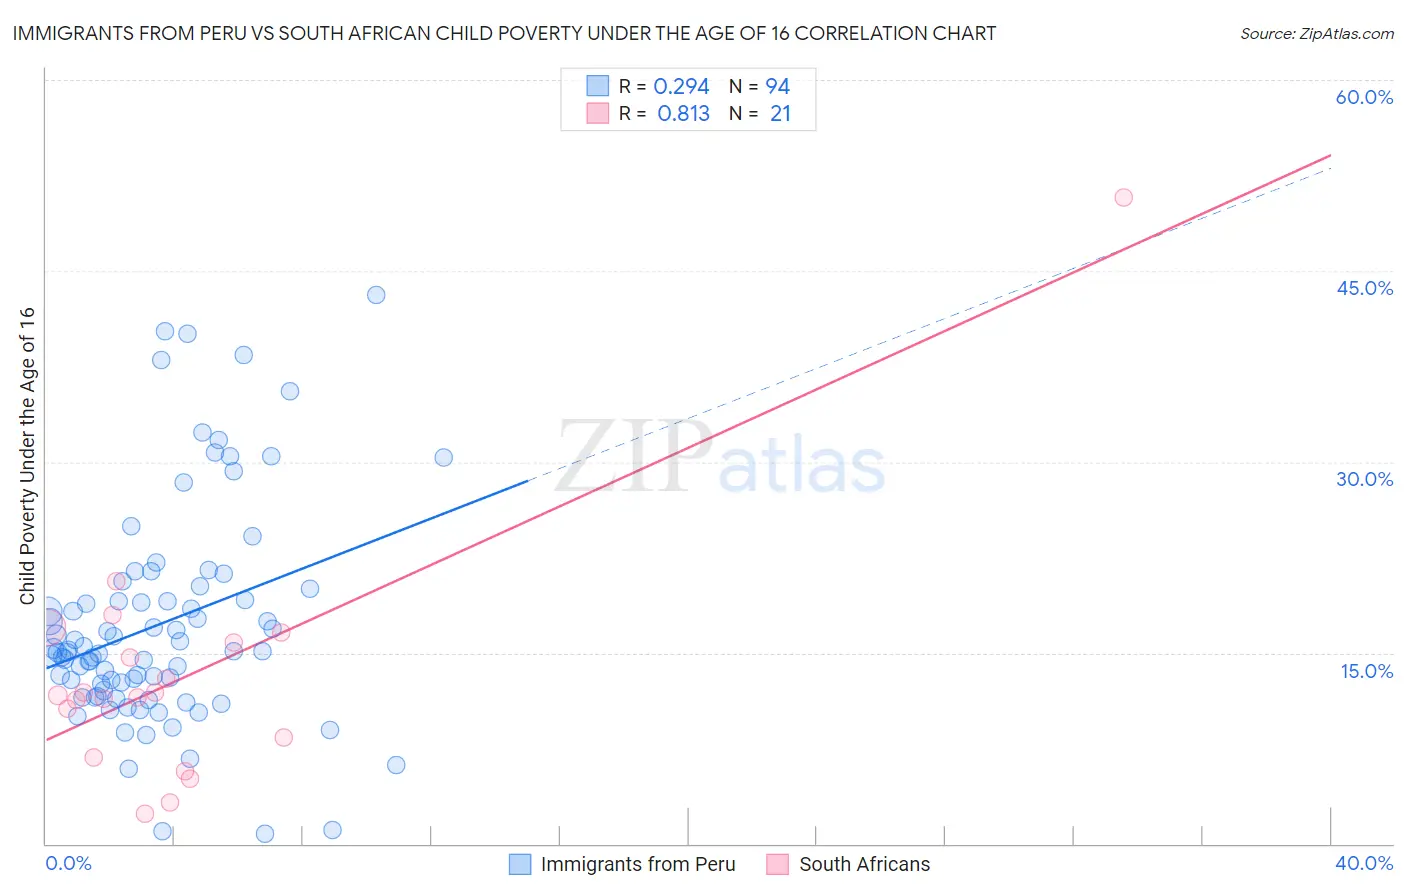 Immigrants from Peru vs South African Child Poverty Under the Age of 16